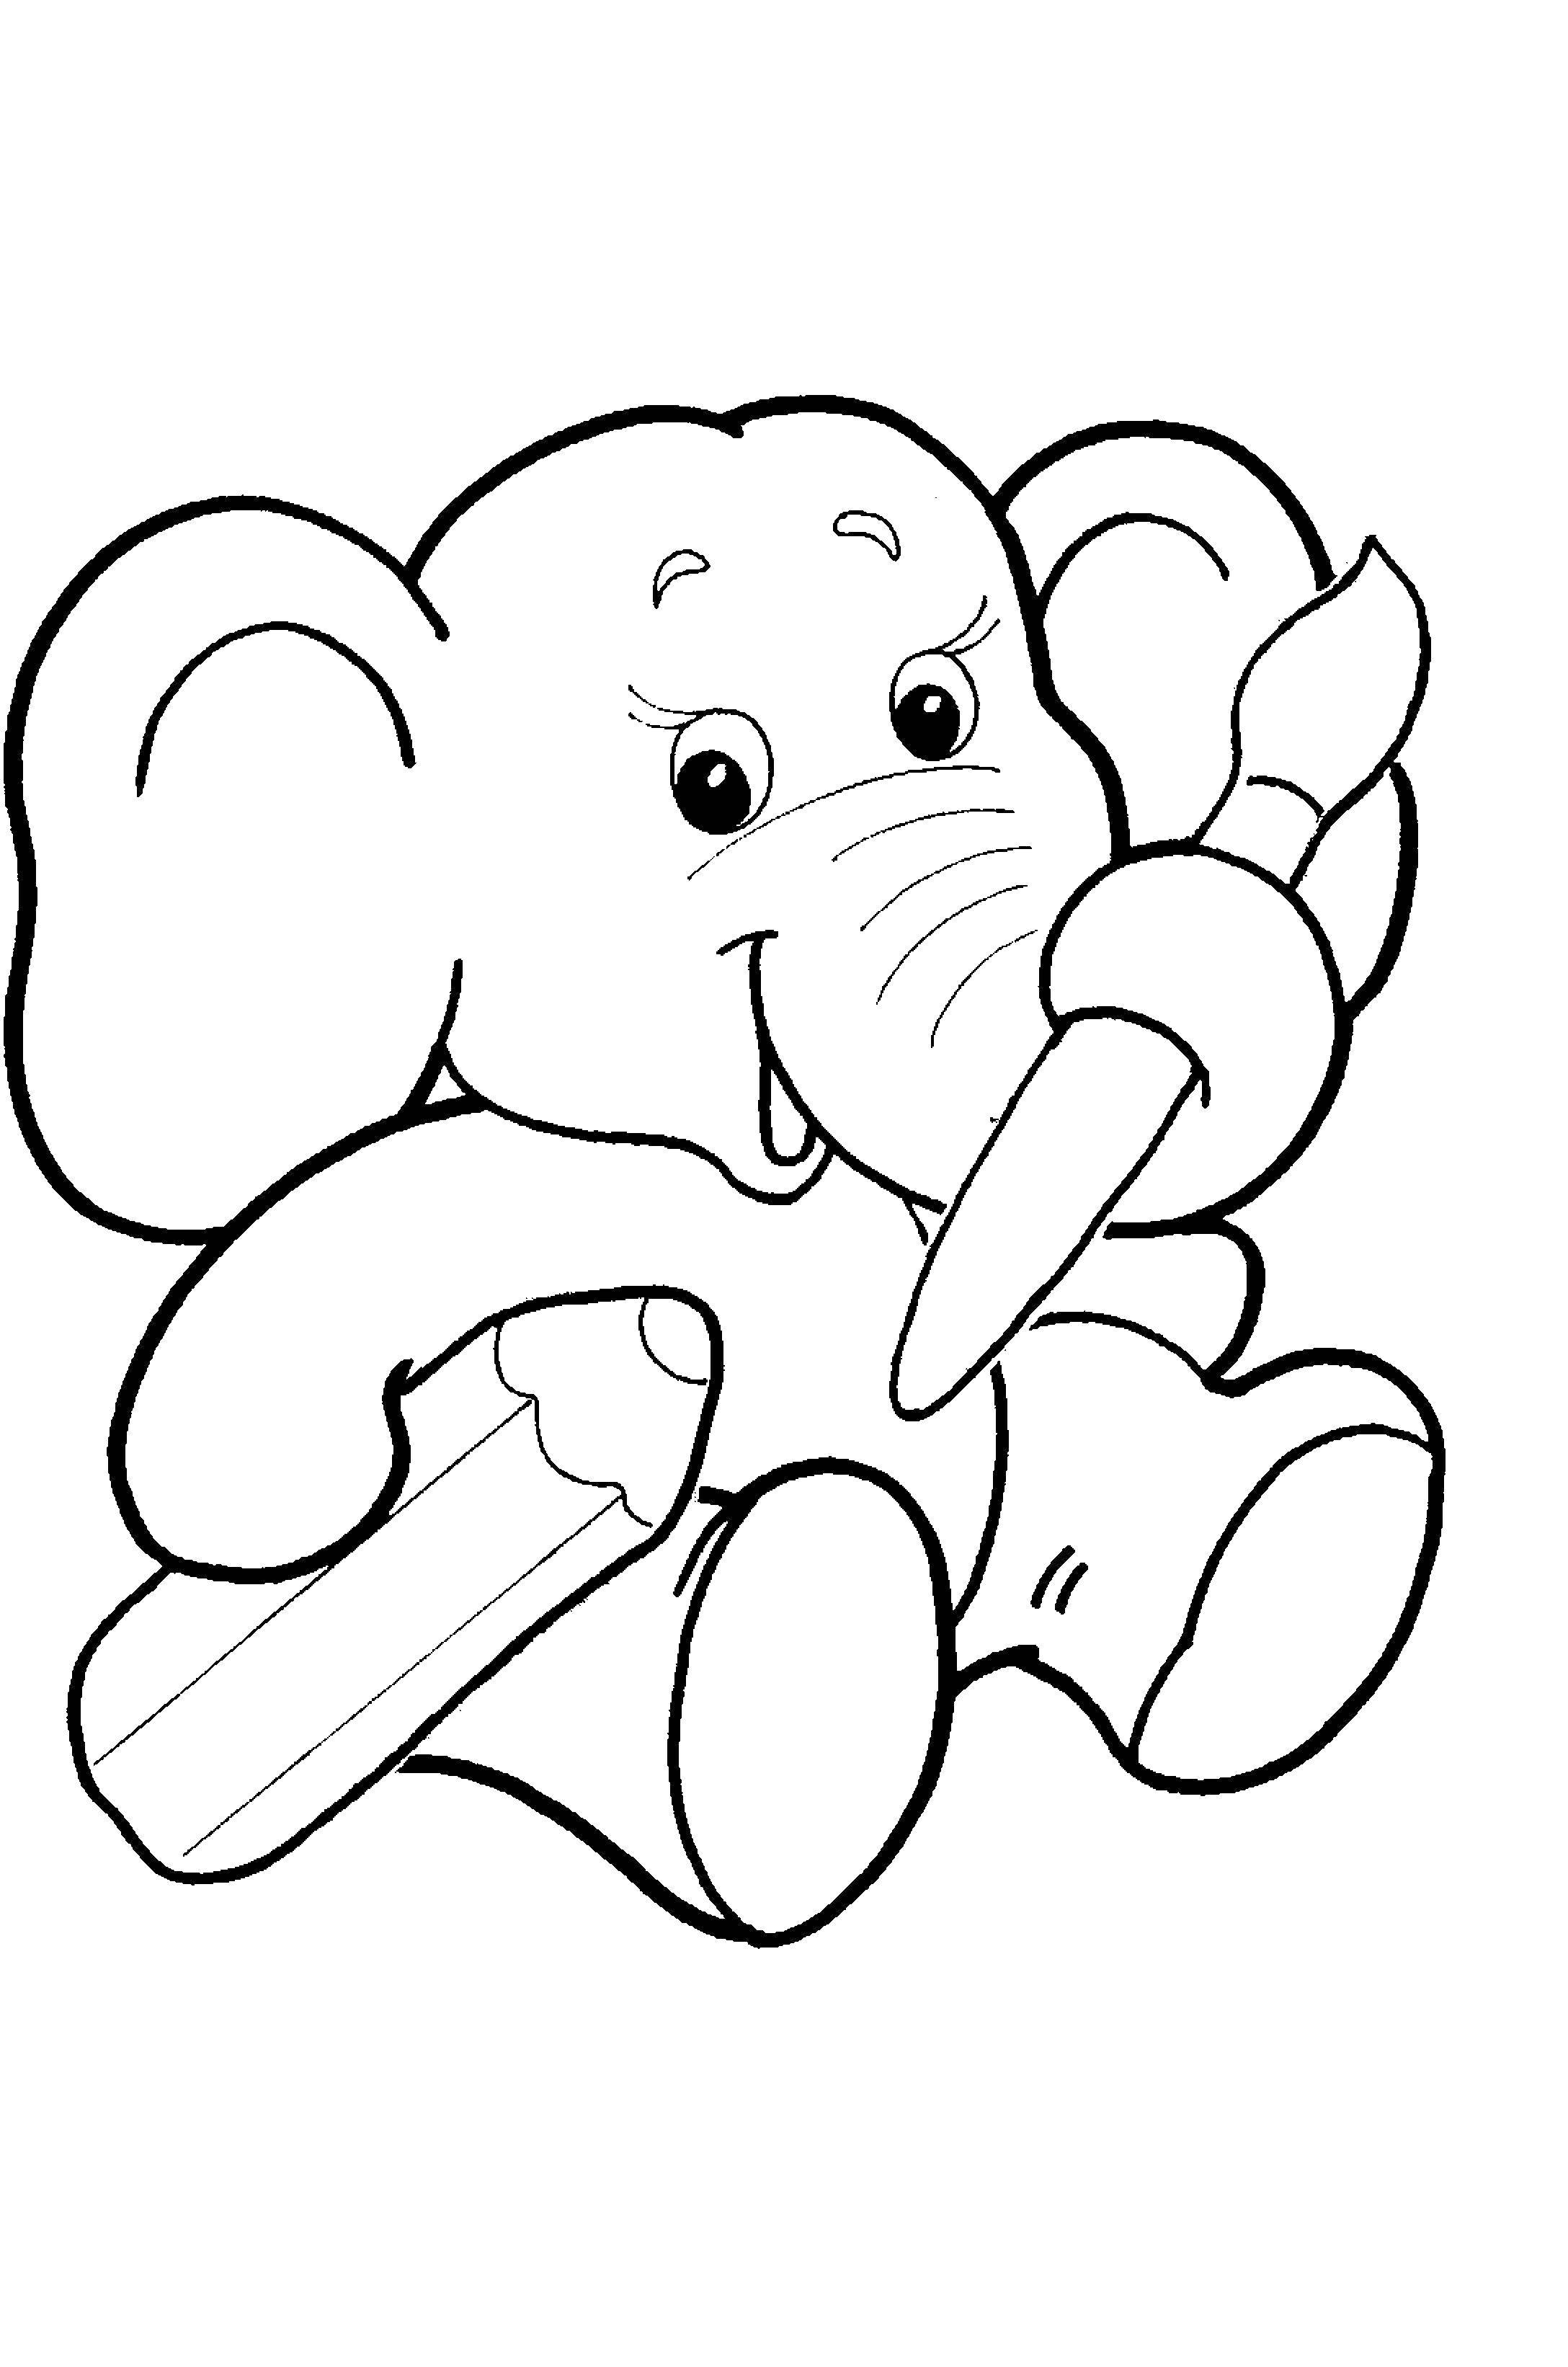 Coloring The elephant draws. Category Animals. Tags:  animals, elephant, drawing, nature.